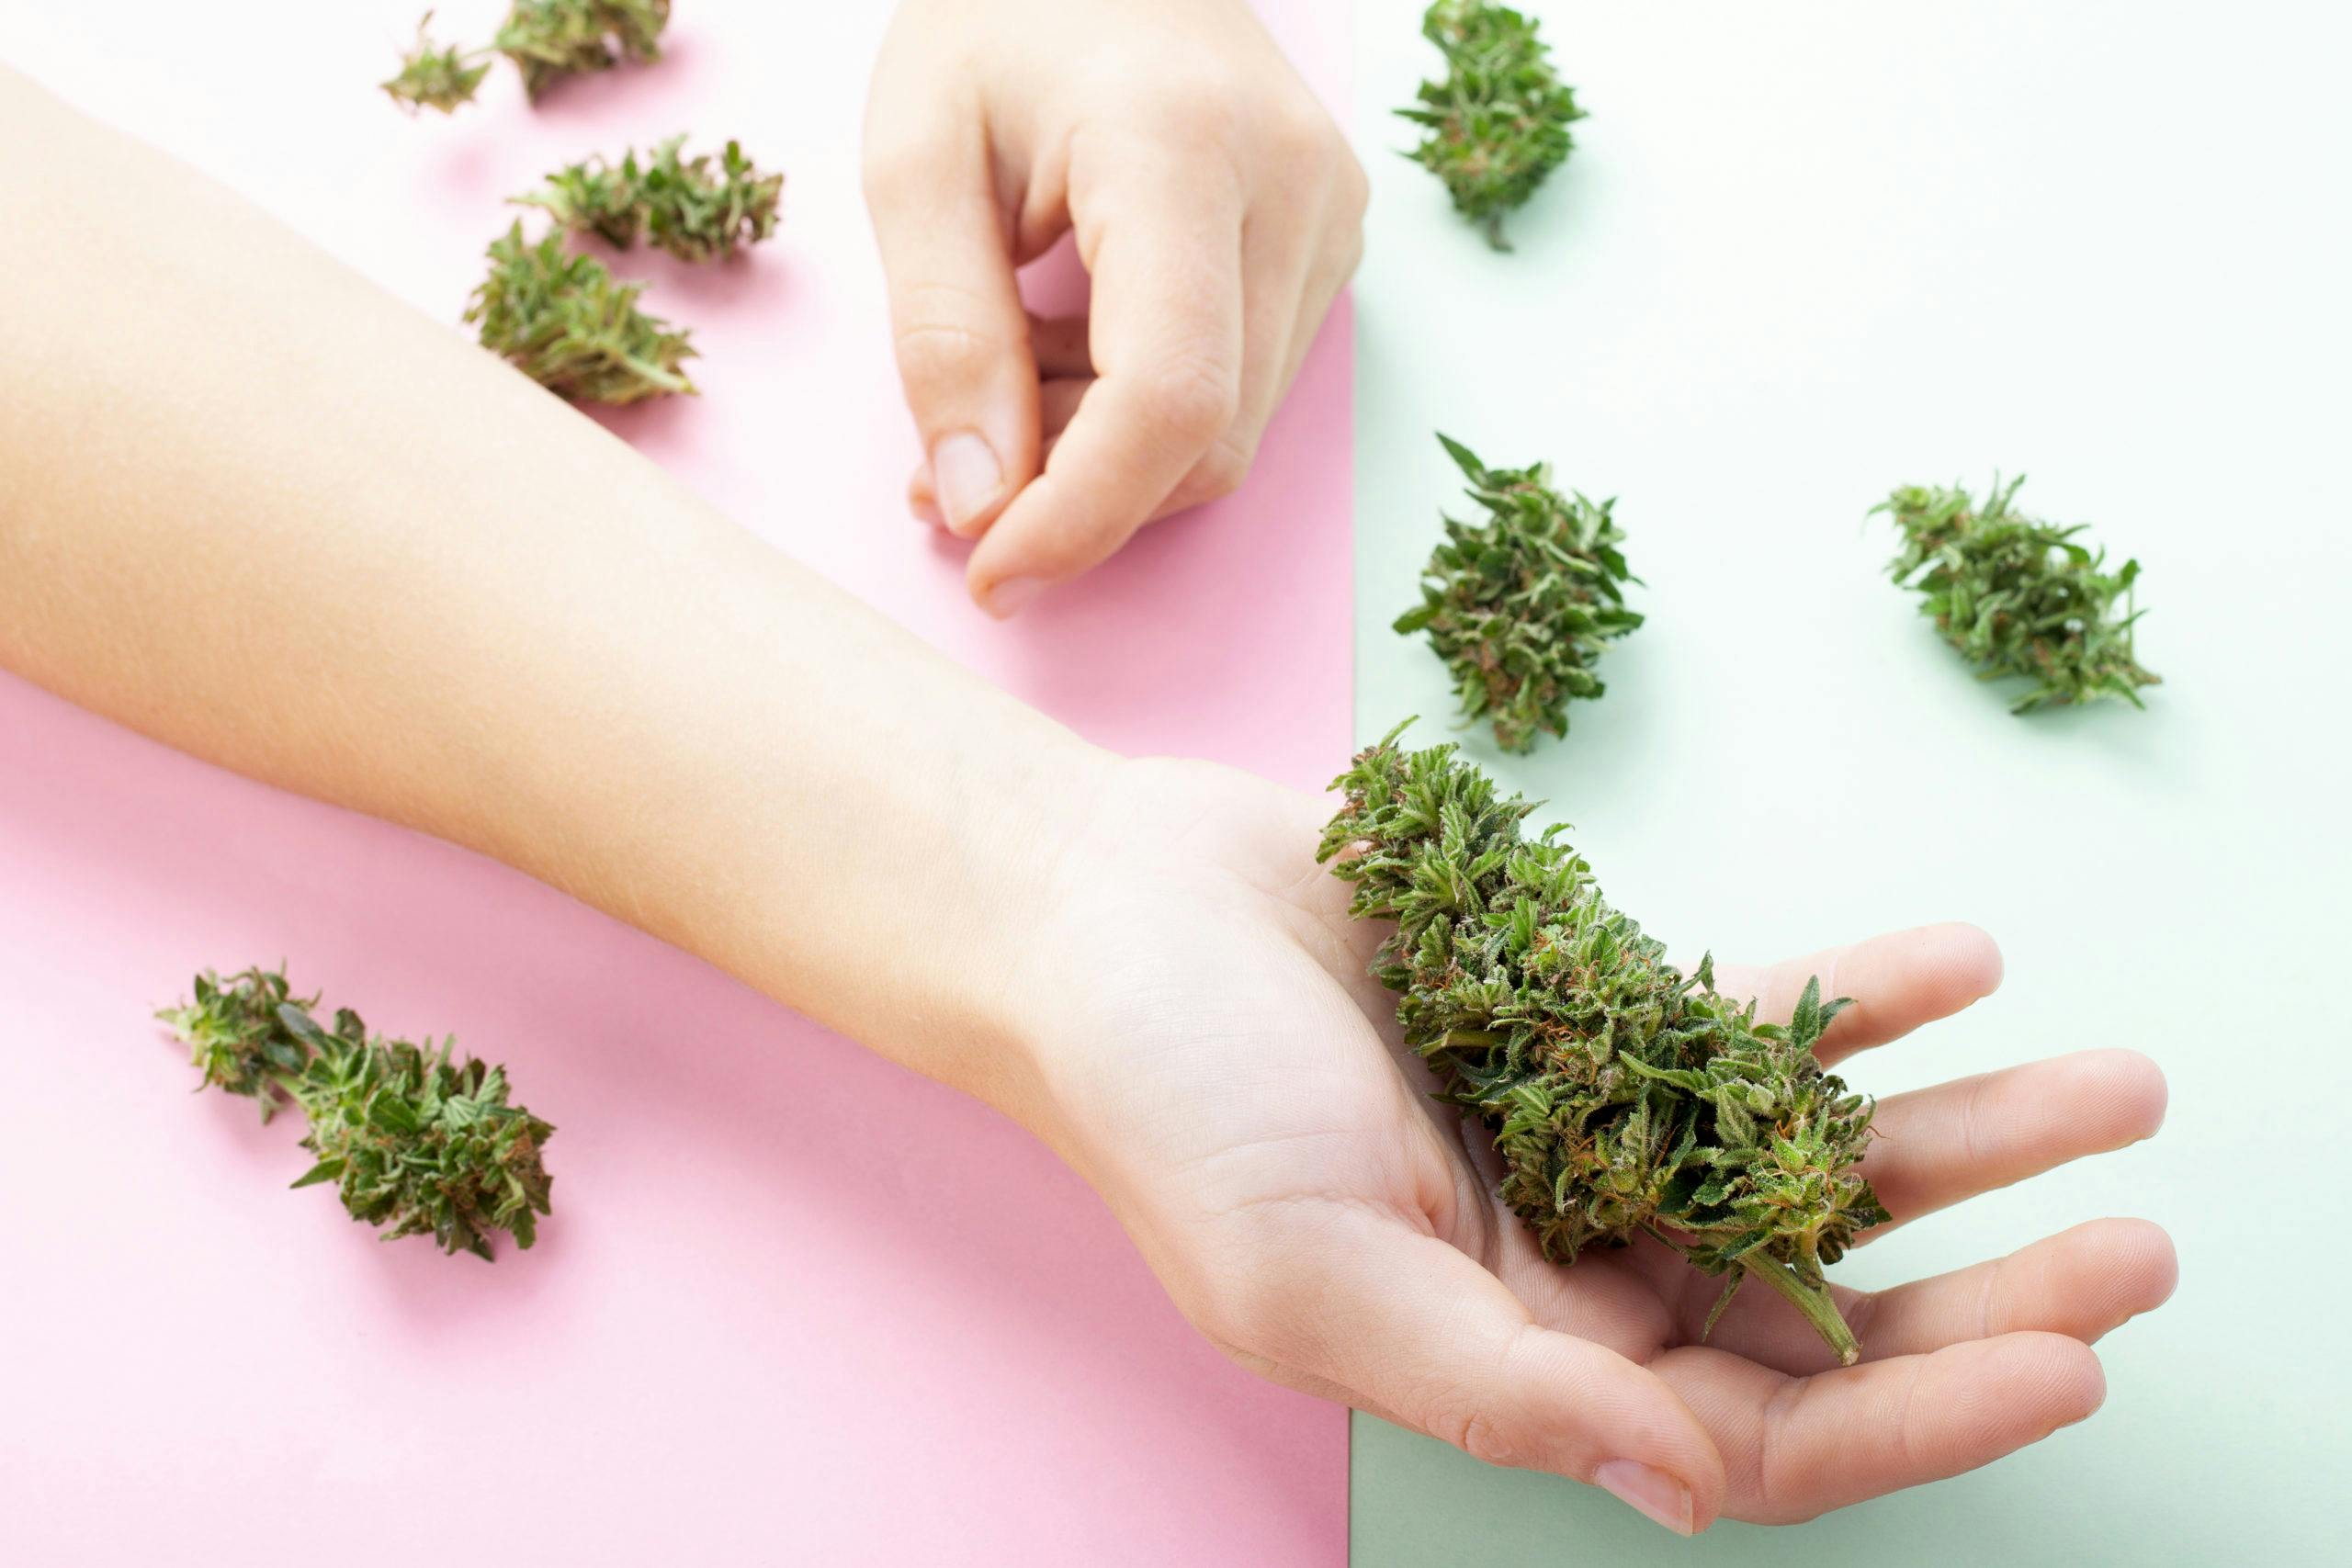 beautiful photo of hand holding dried cannabis flower over pink and white background